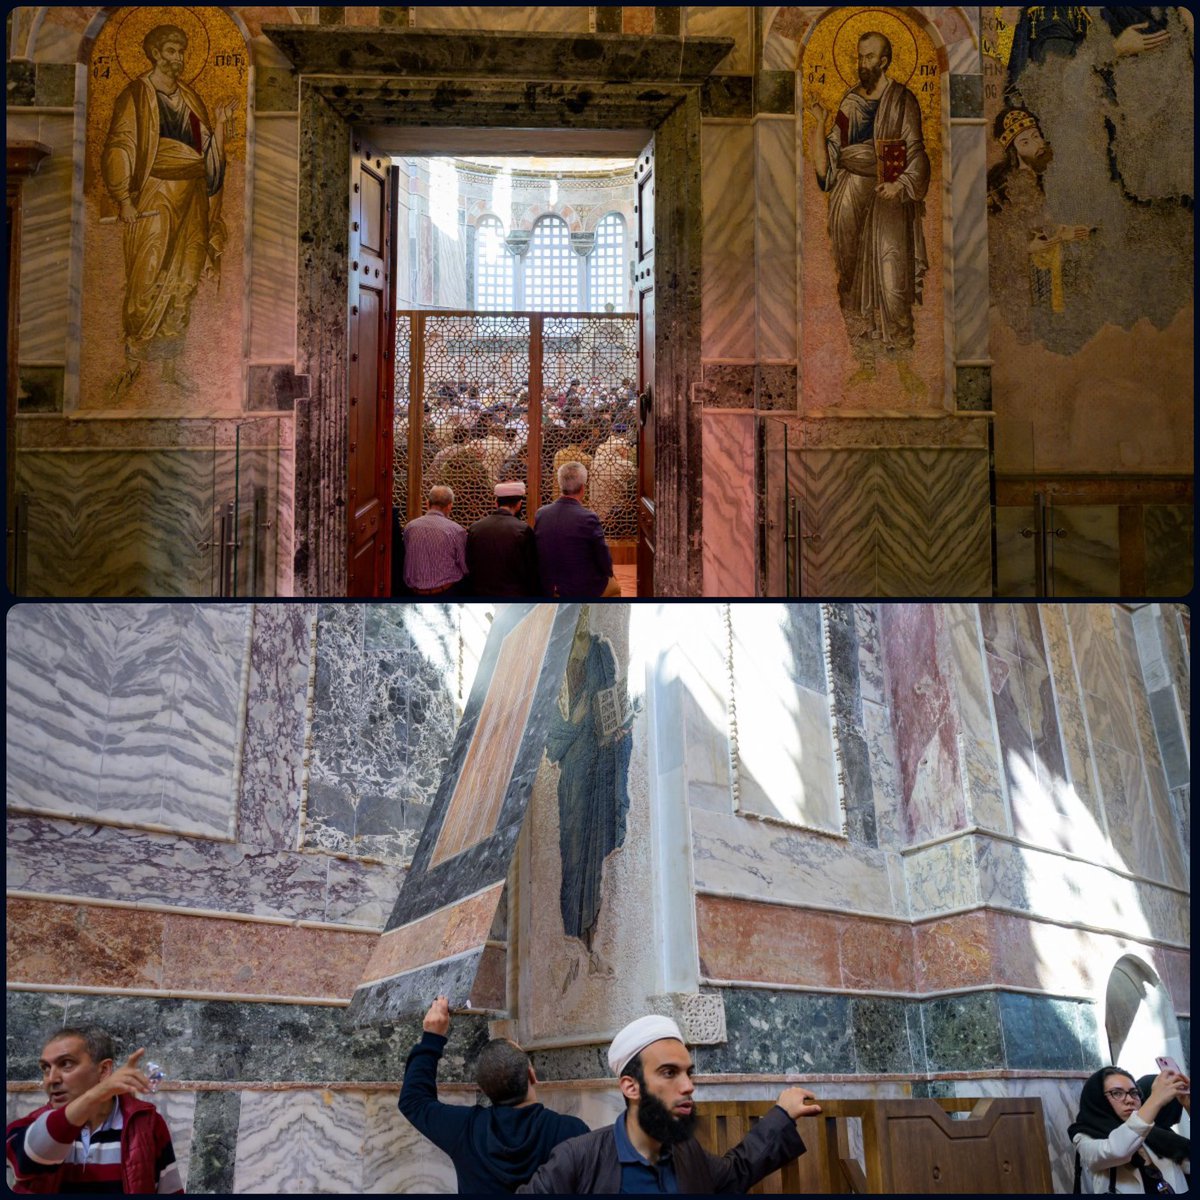 I find the fake panel covering the mosaics to be odd. I really don’t see how Chora is well-suited as a mosque. It looks cramped and like the layout isn’t ideal. It’s sad it was re-converted purely to be a symbolic cultural trophy, it would be far better being purely a museum.